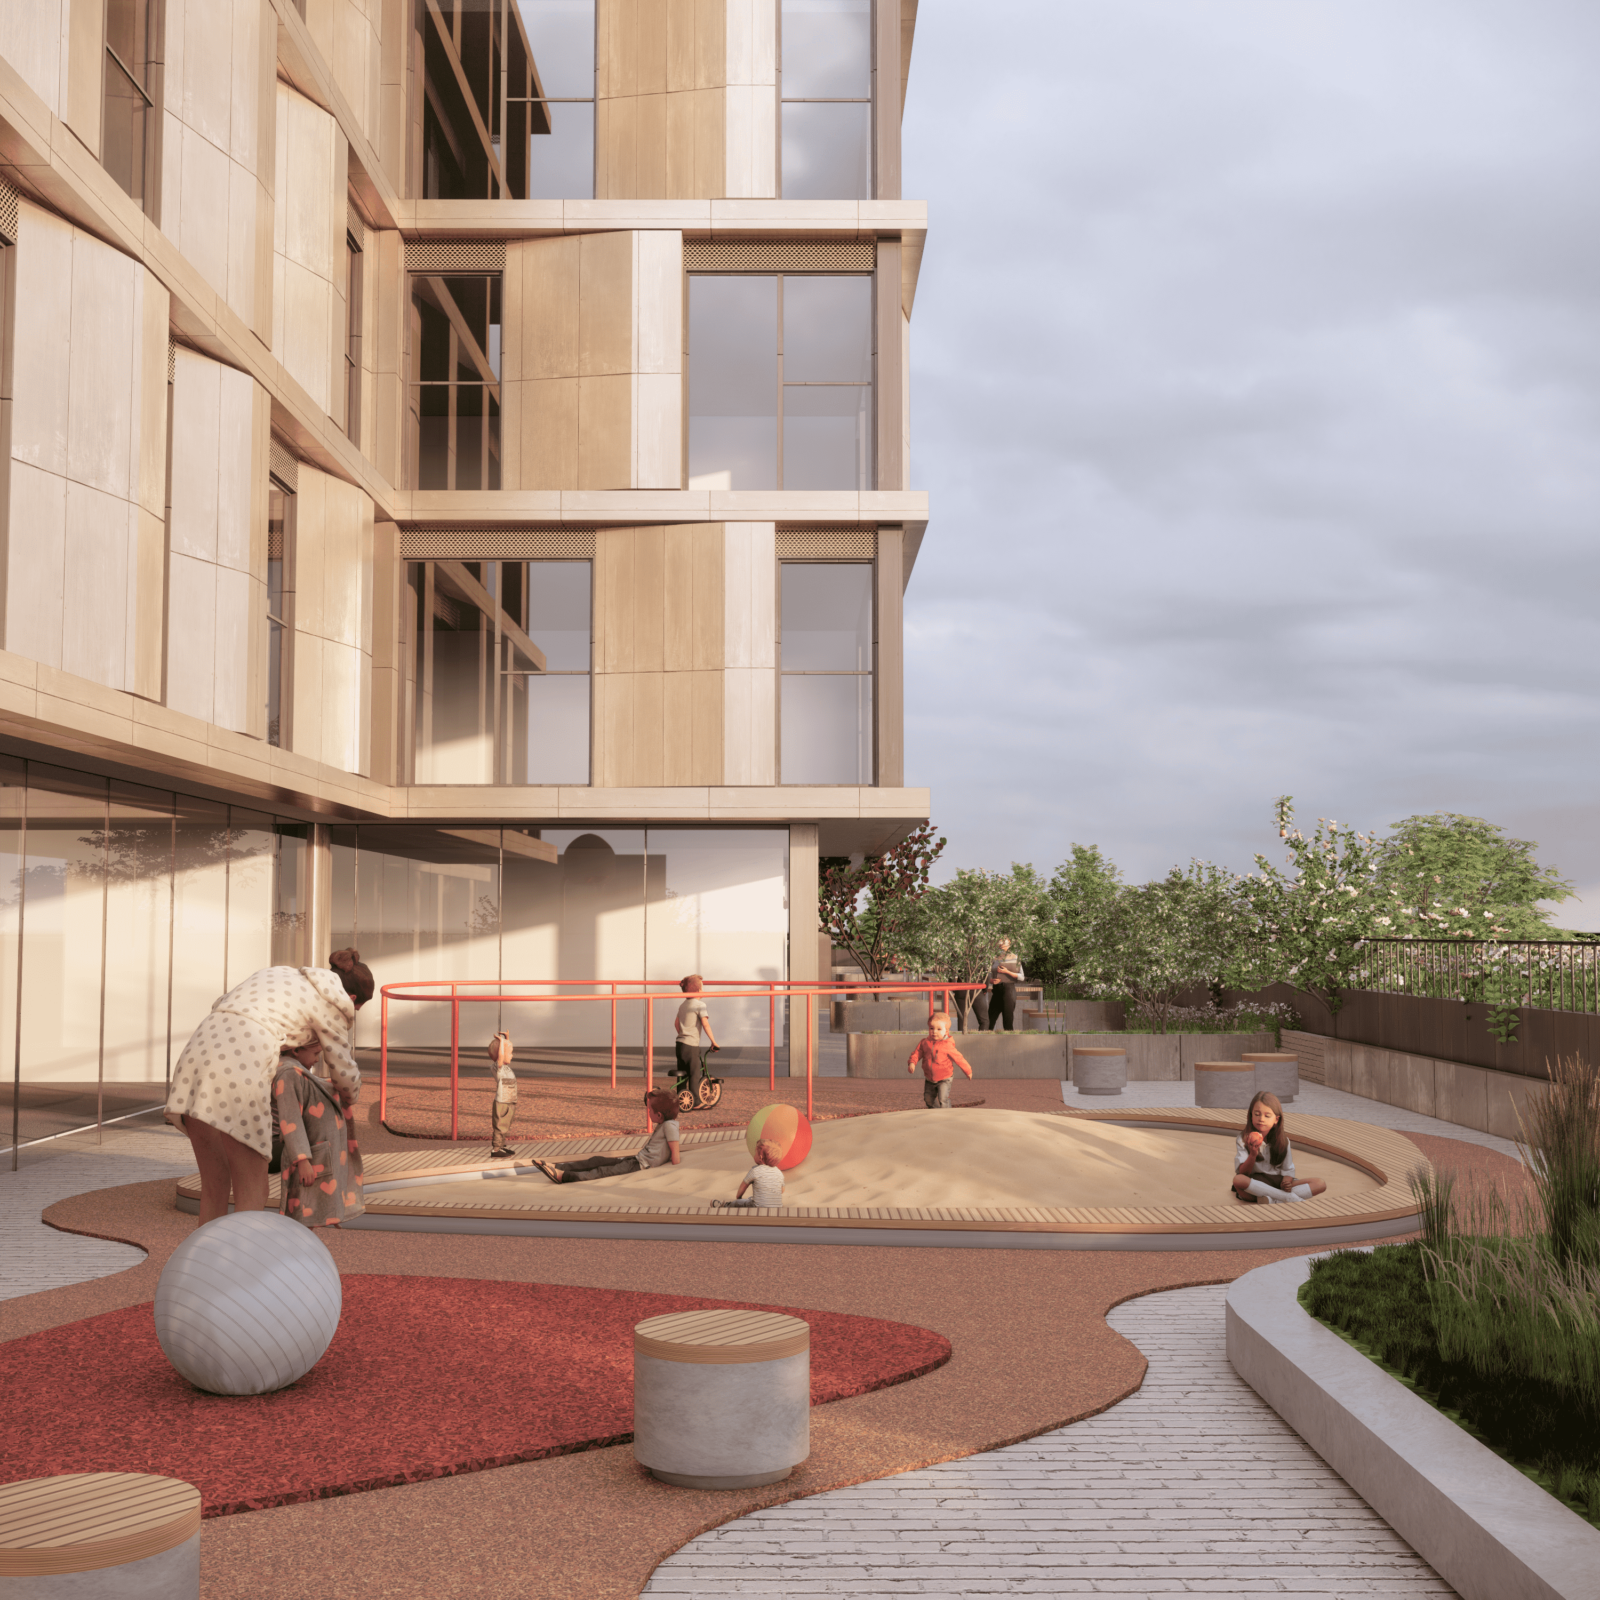 A rendering of a children's playground in front of the condo building with children playing